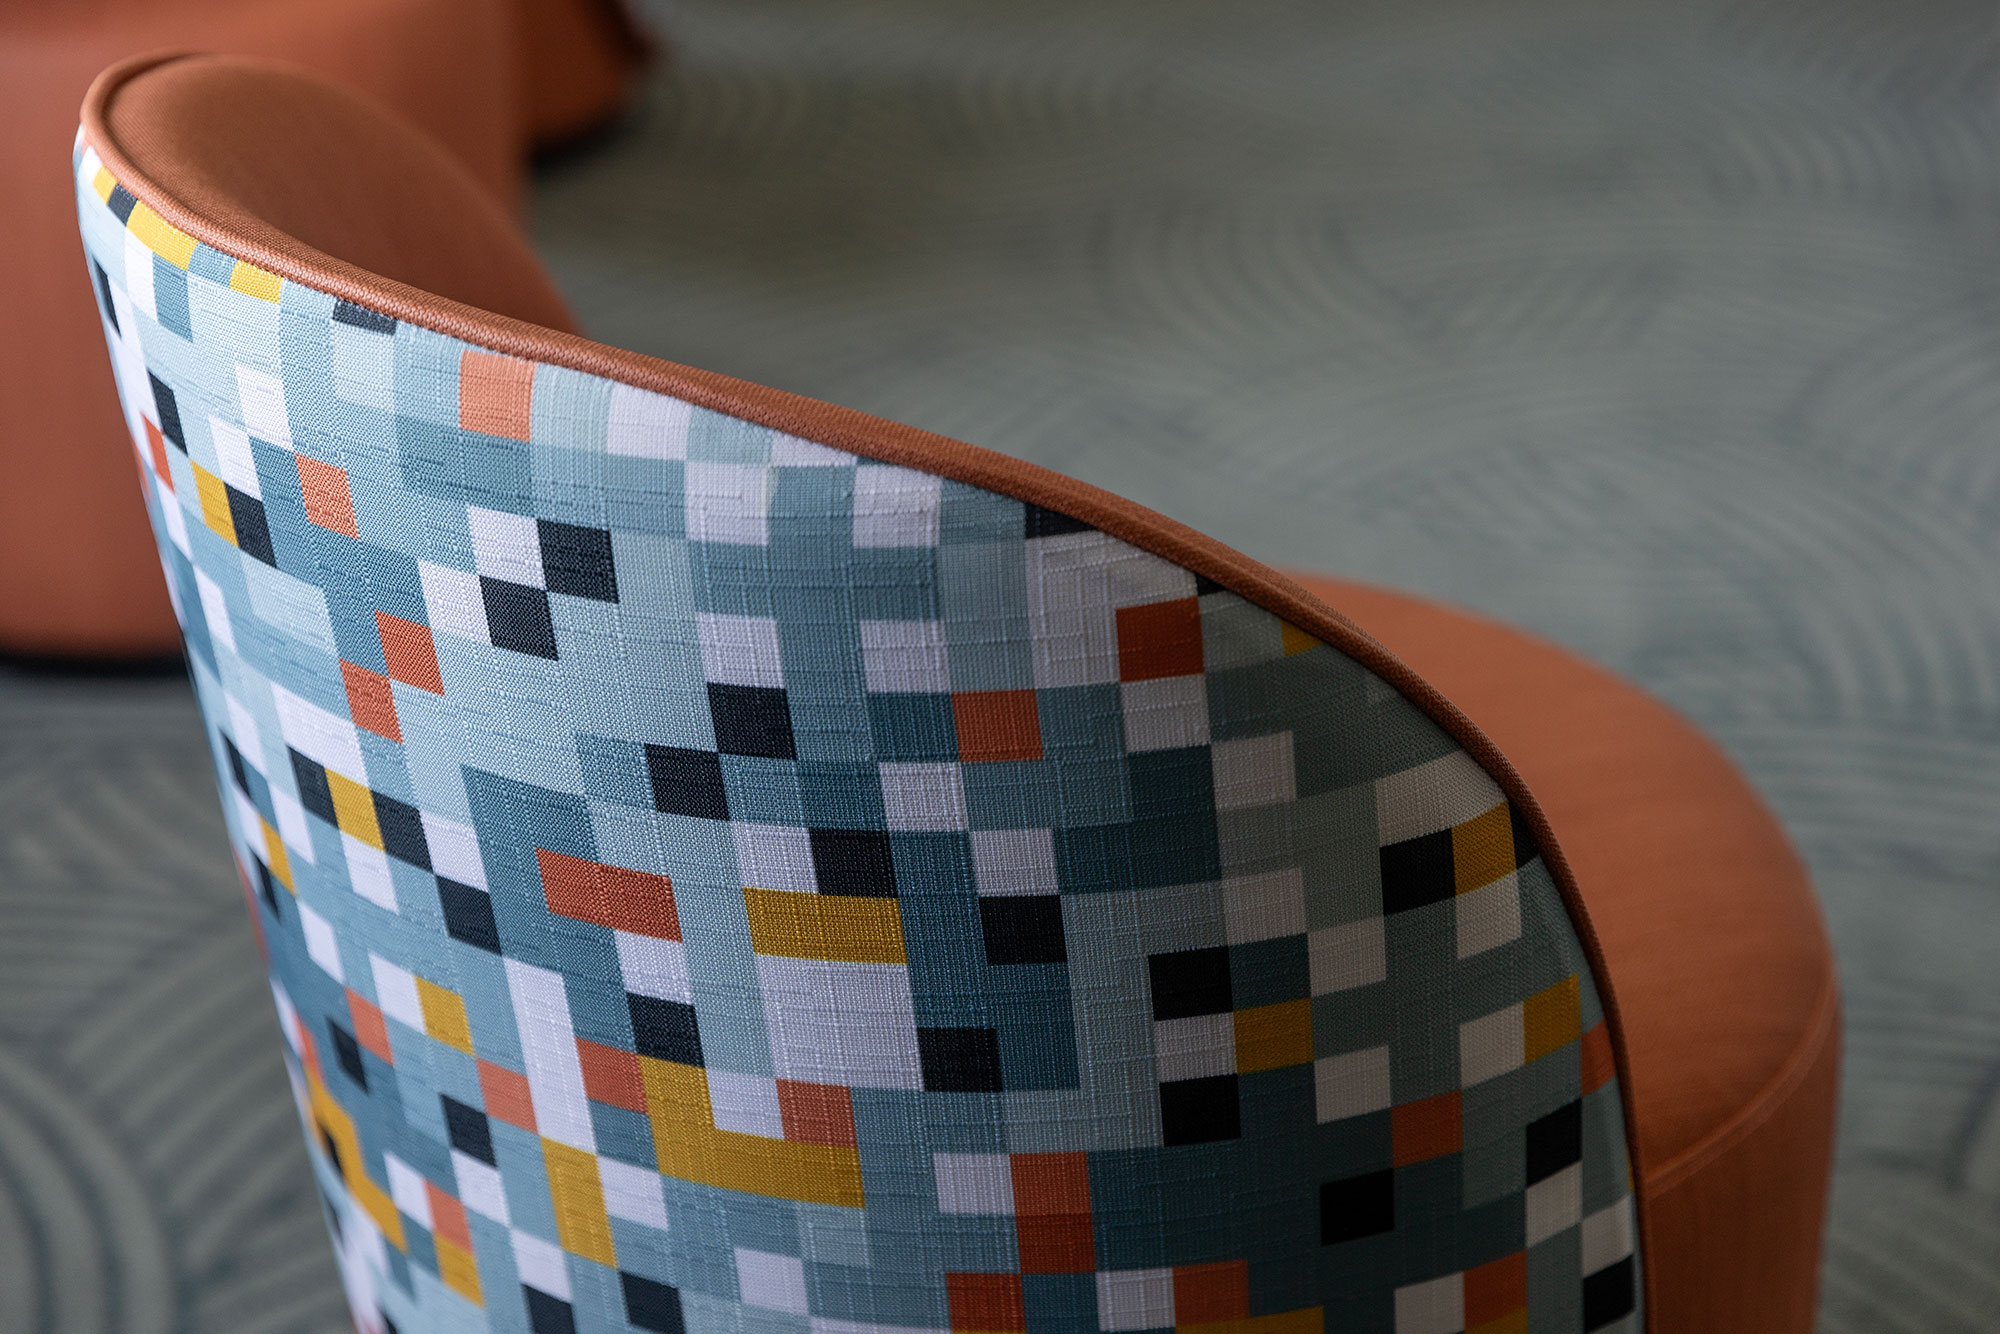 chair with a textured square pattern